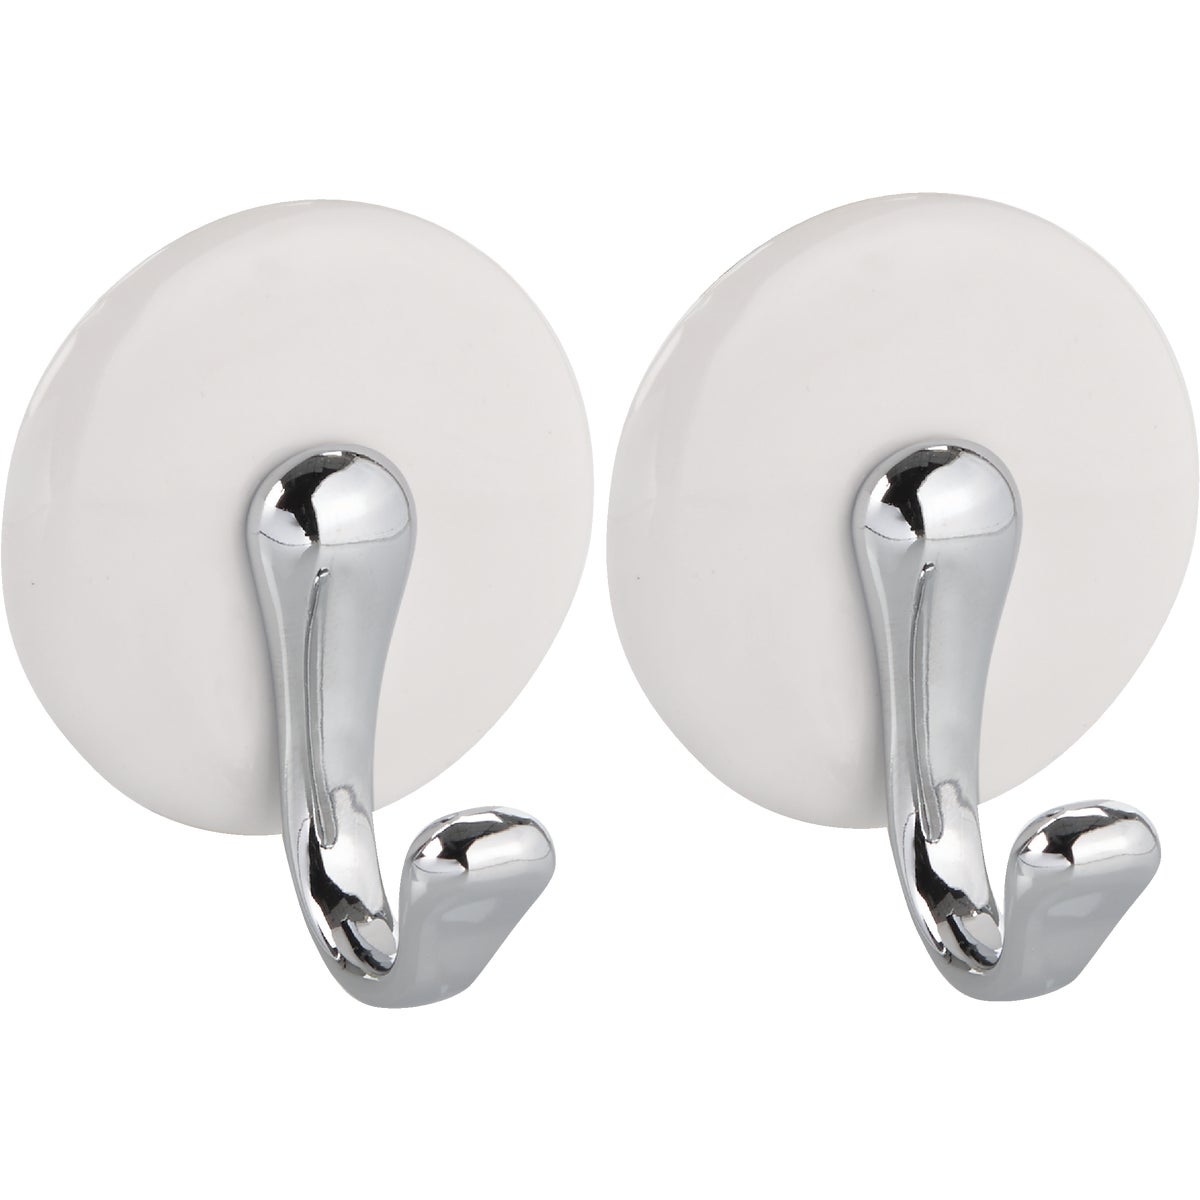 Item 603724, York medium ceramic hook with chrome accents attach easily to your wall and